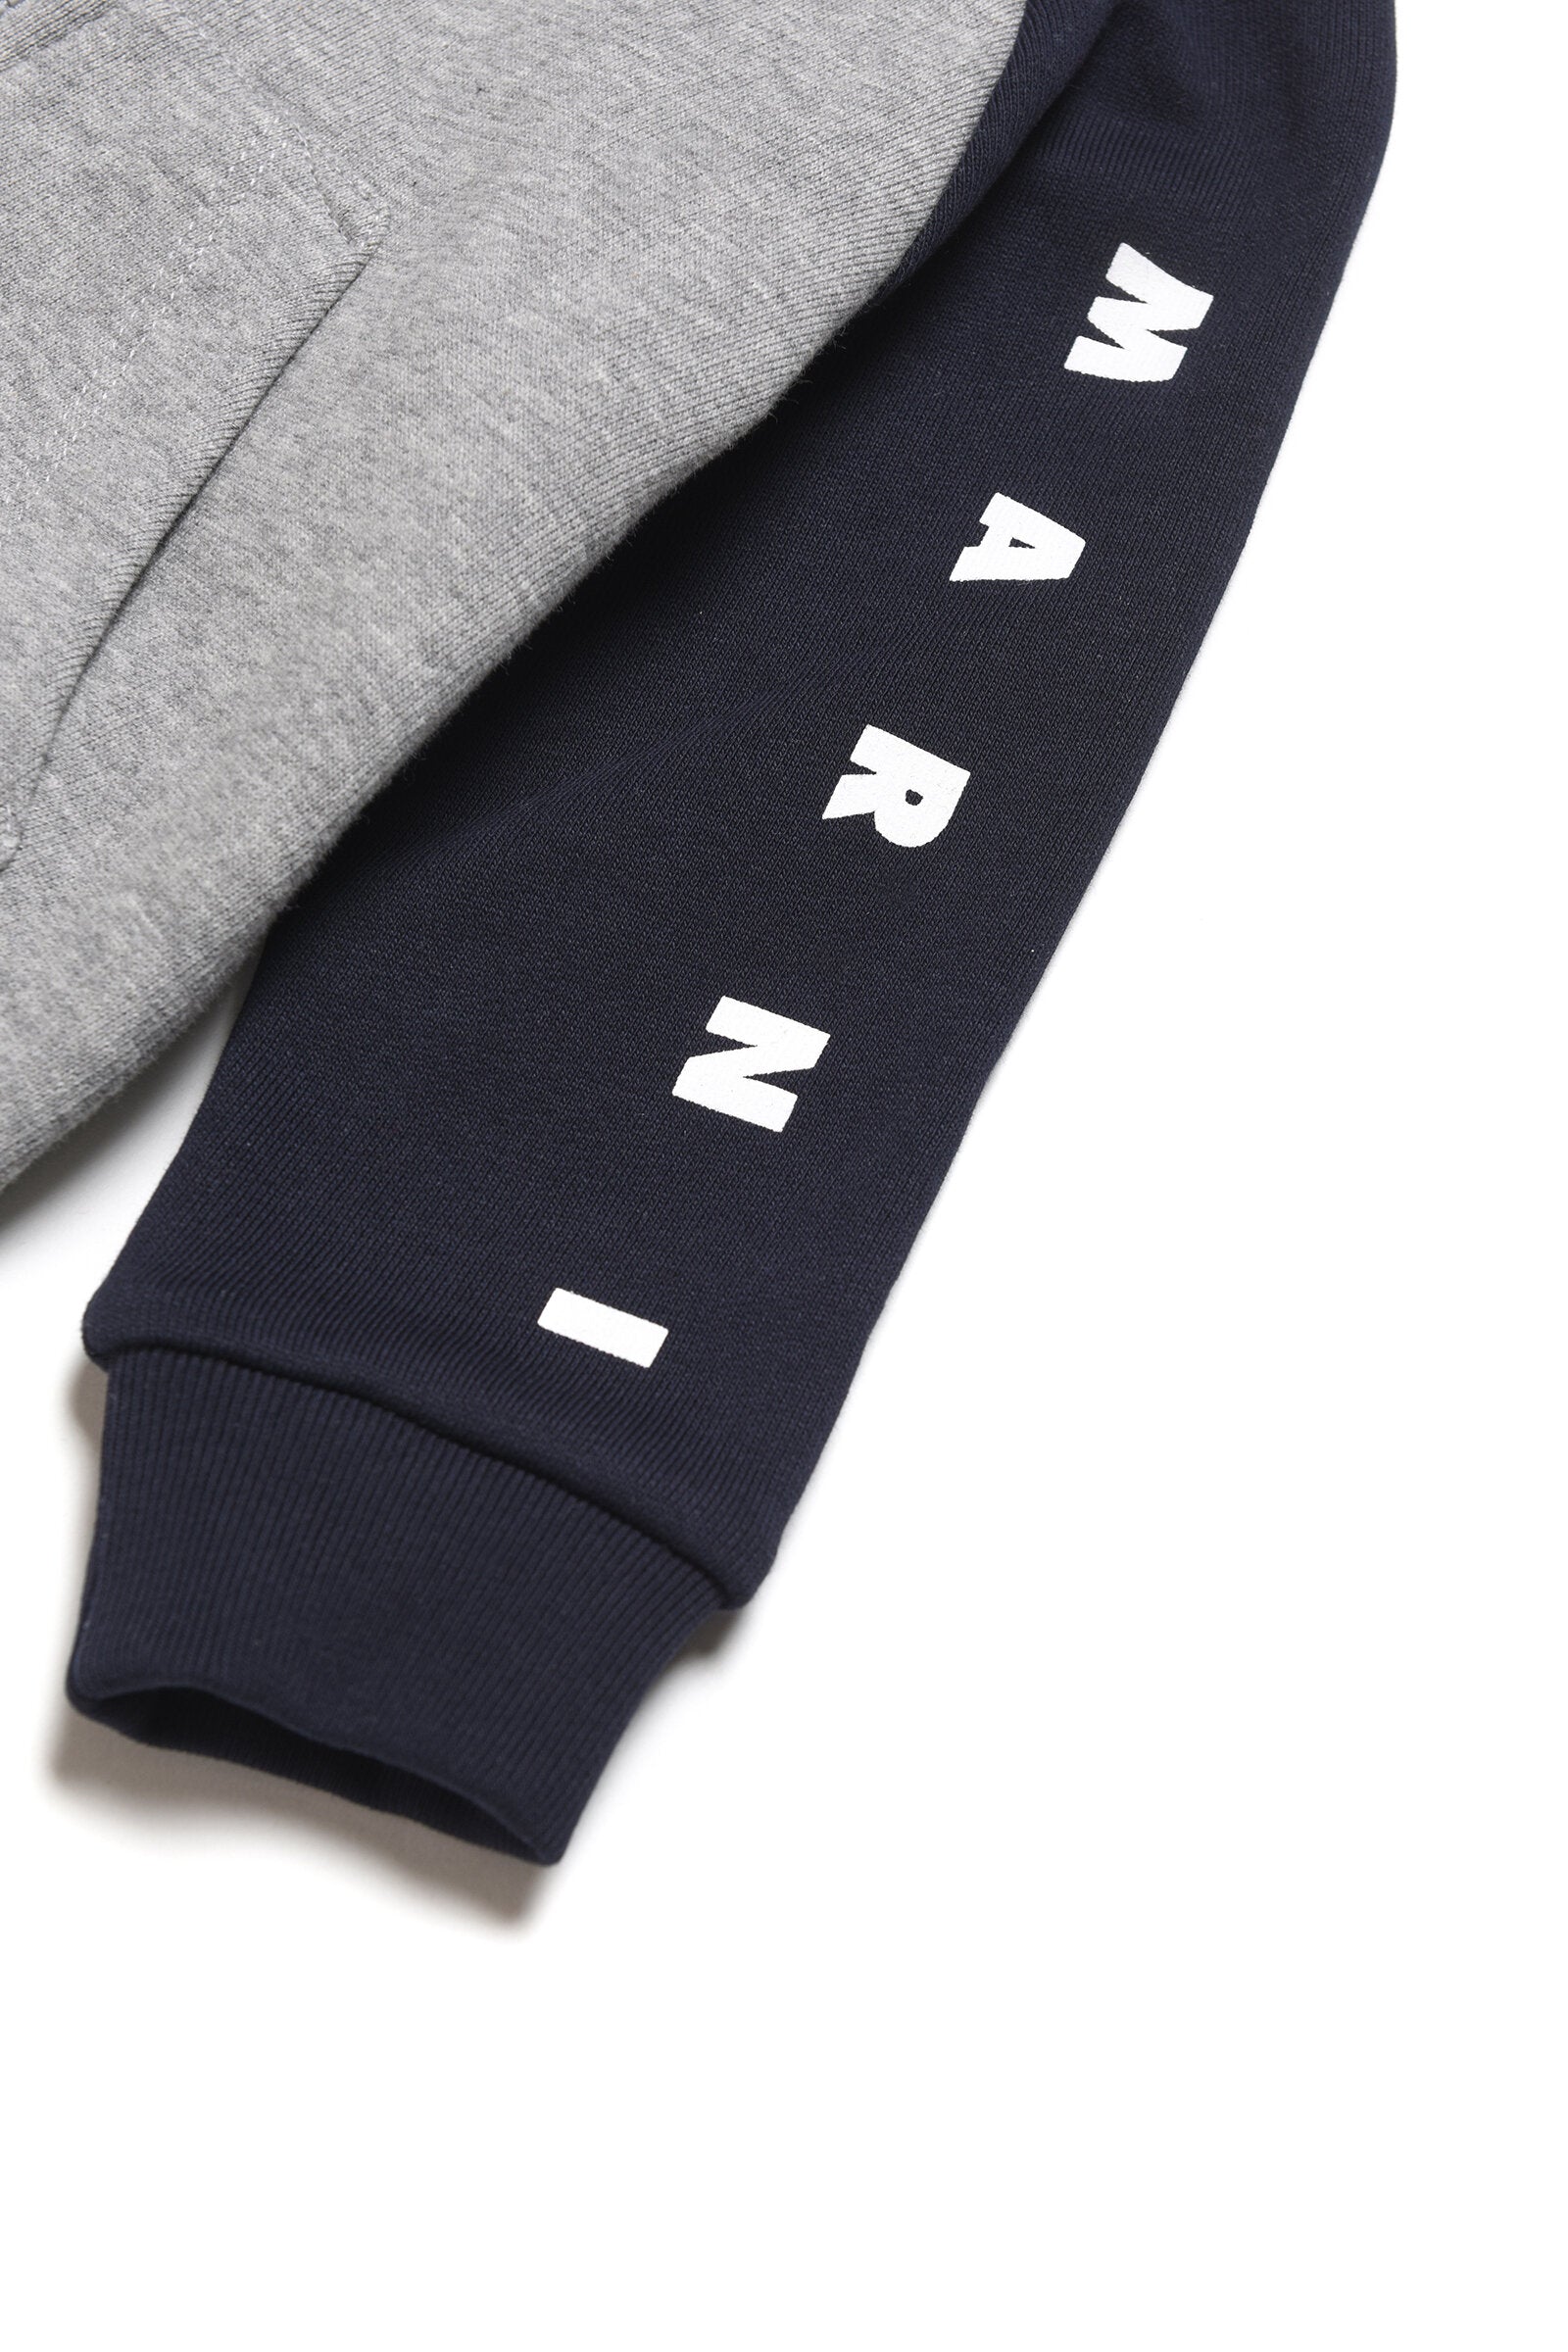 Cotton sweatshirt with zip and logoed colorblock bands